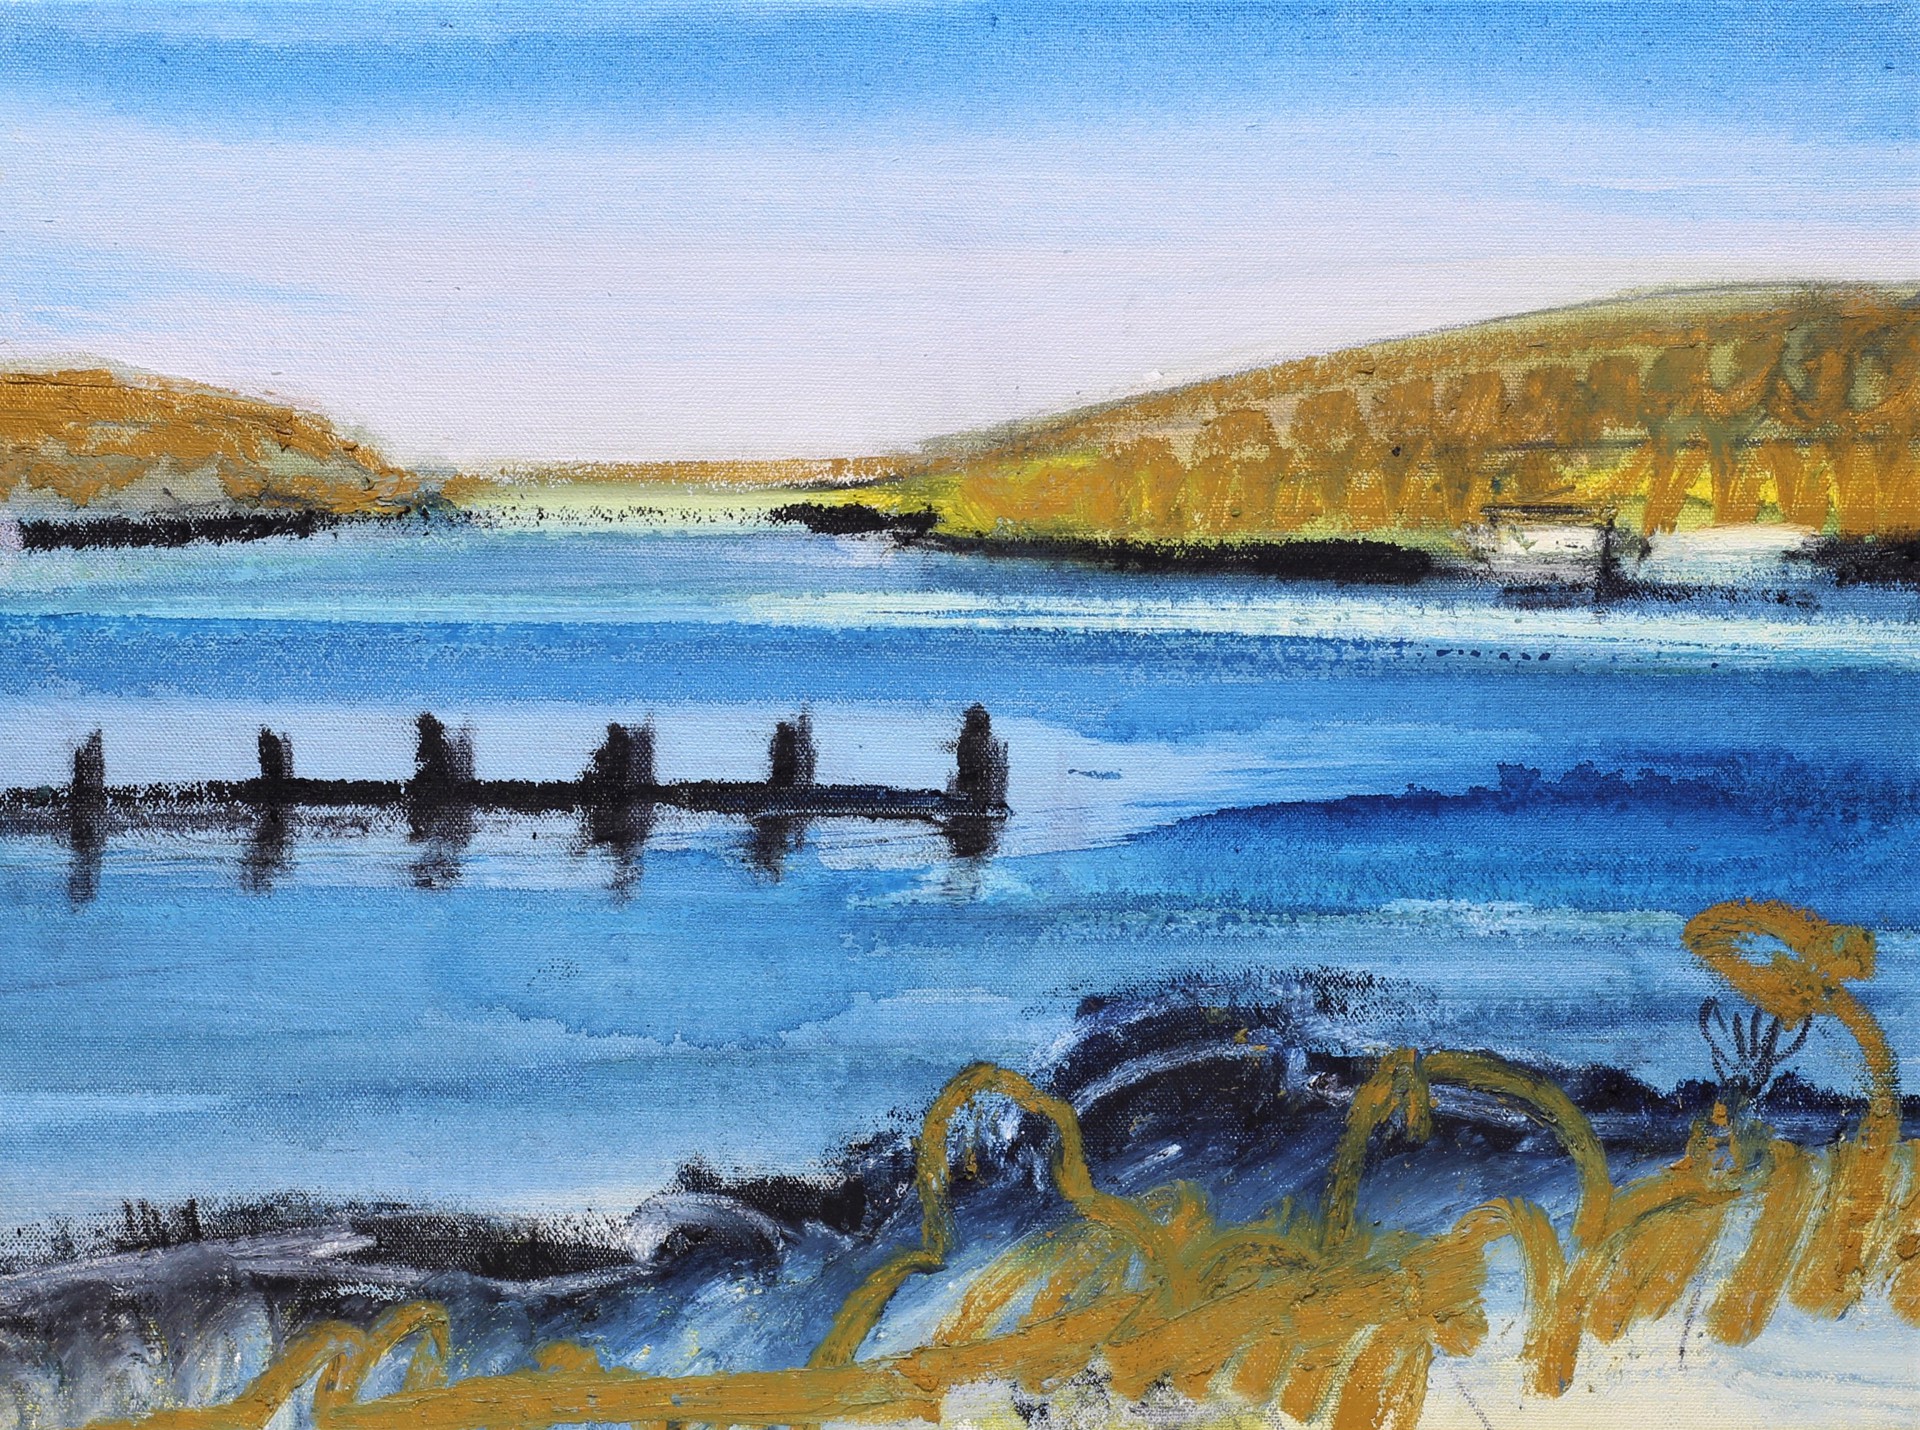 LOOKING DOWN THE COVE by CHRISTINA THWAITES (Landscape)